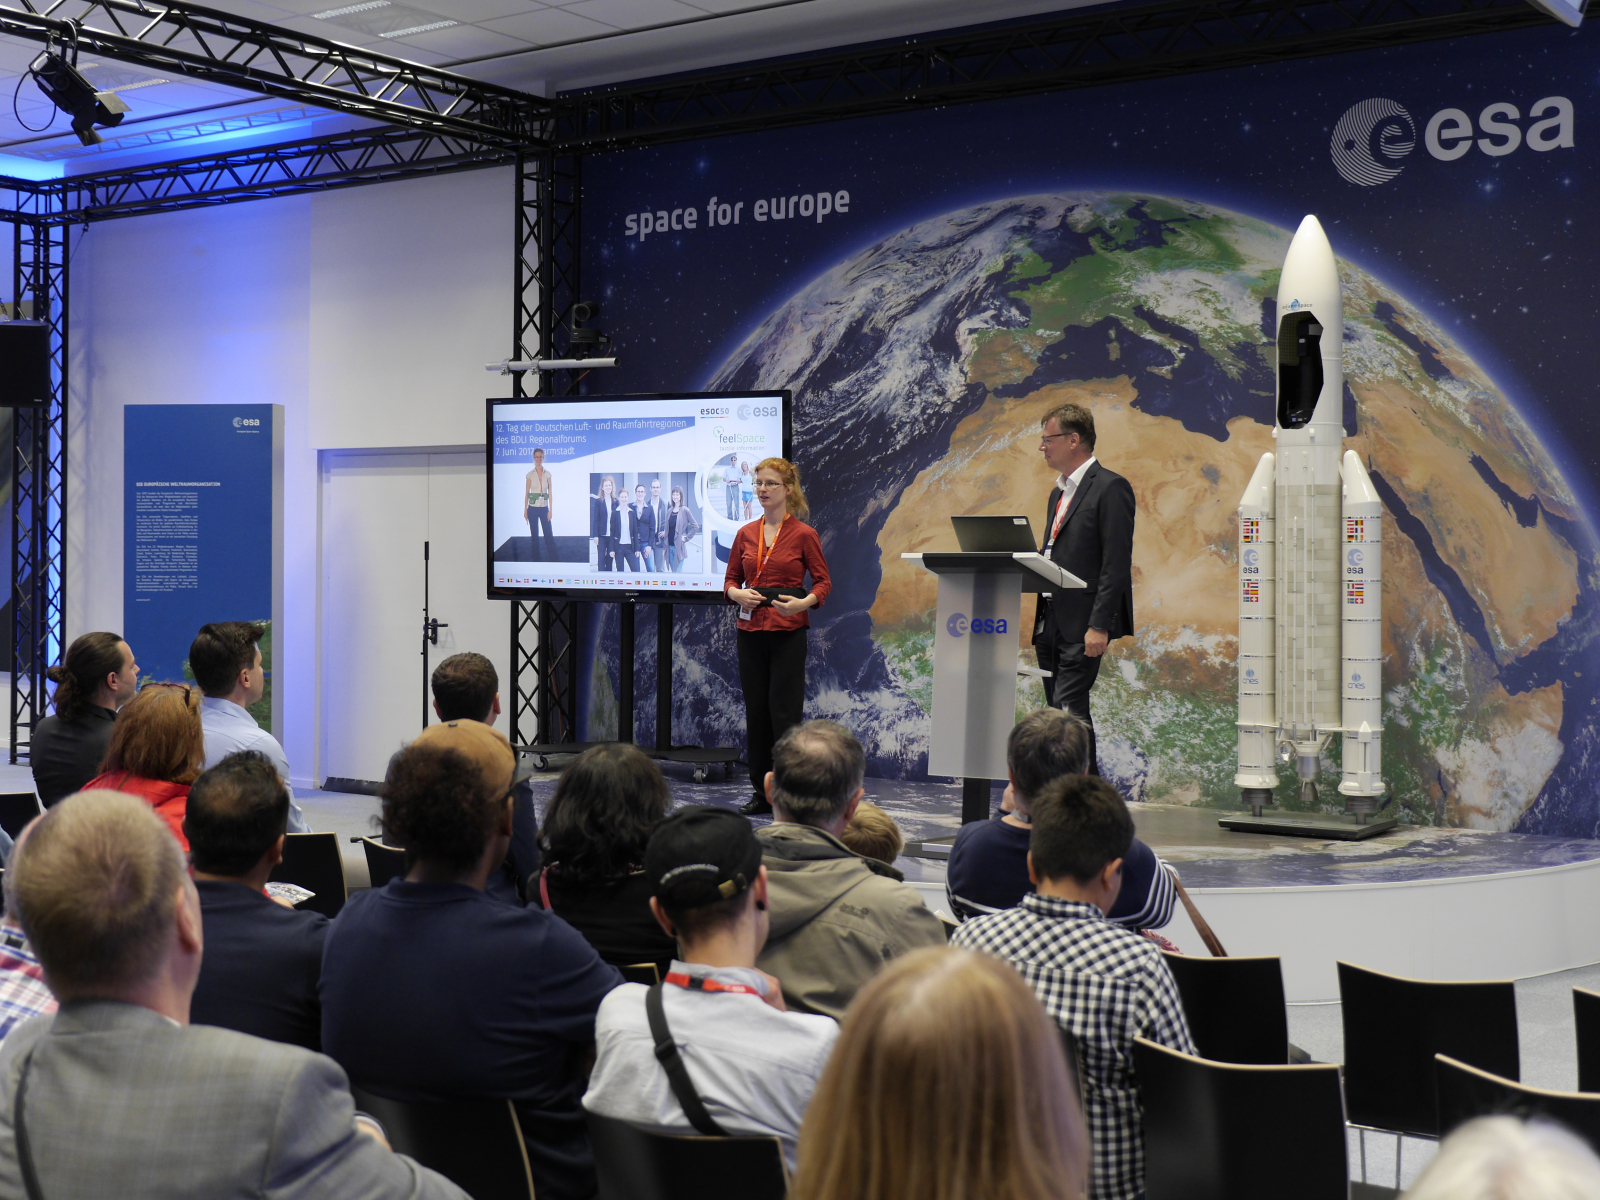 Caption: Demonstration of the NaviBelt by feelSpace in the European Satellite Operations Centre ESOC (credits: ESA BIC Hessen).